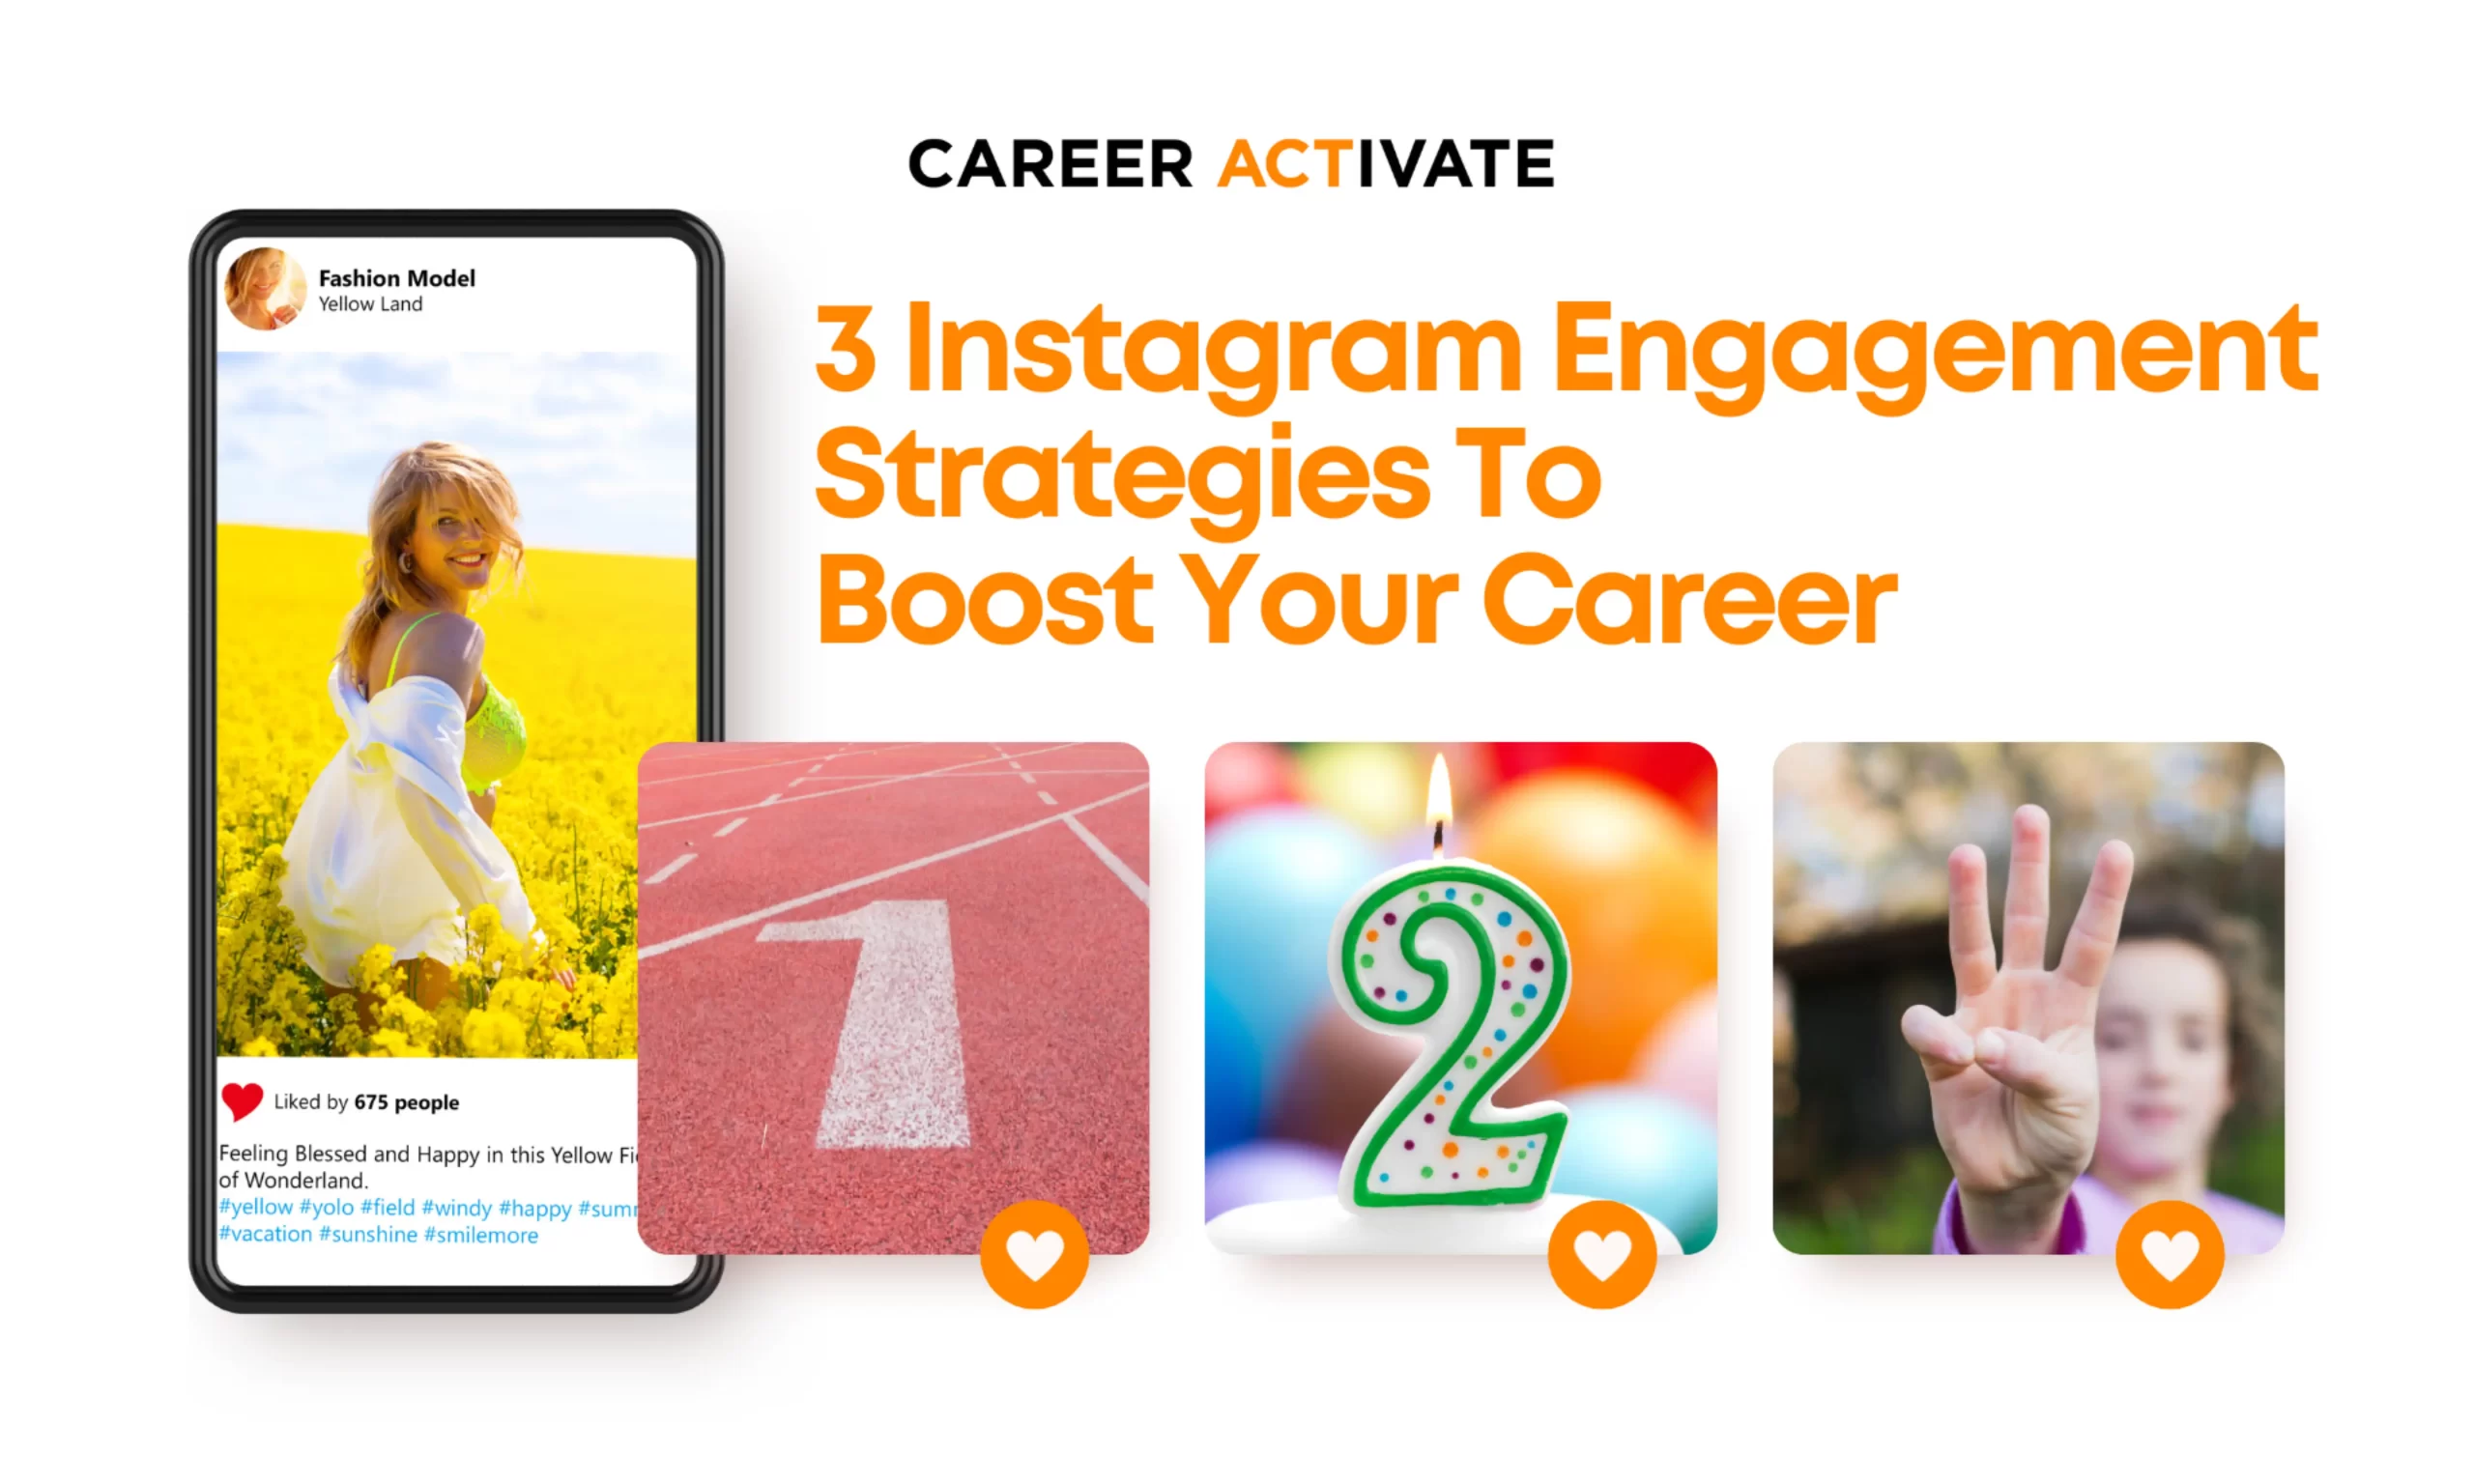 3 Instagram Engagement Strategies to Boost Your Career